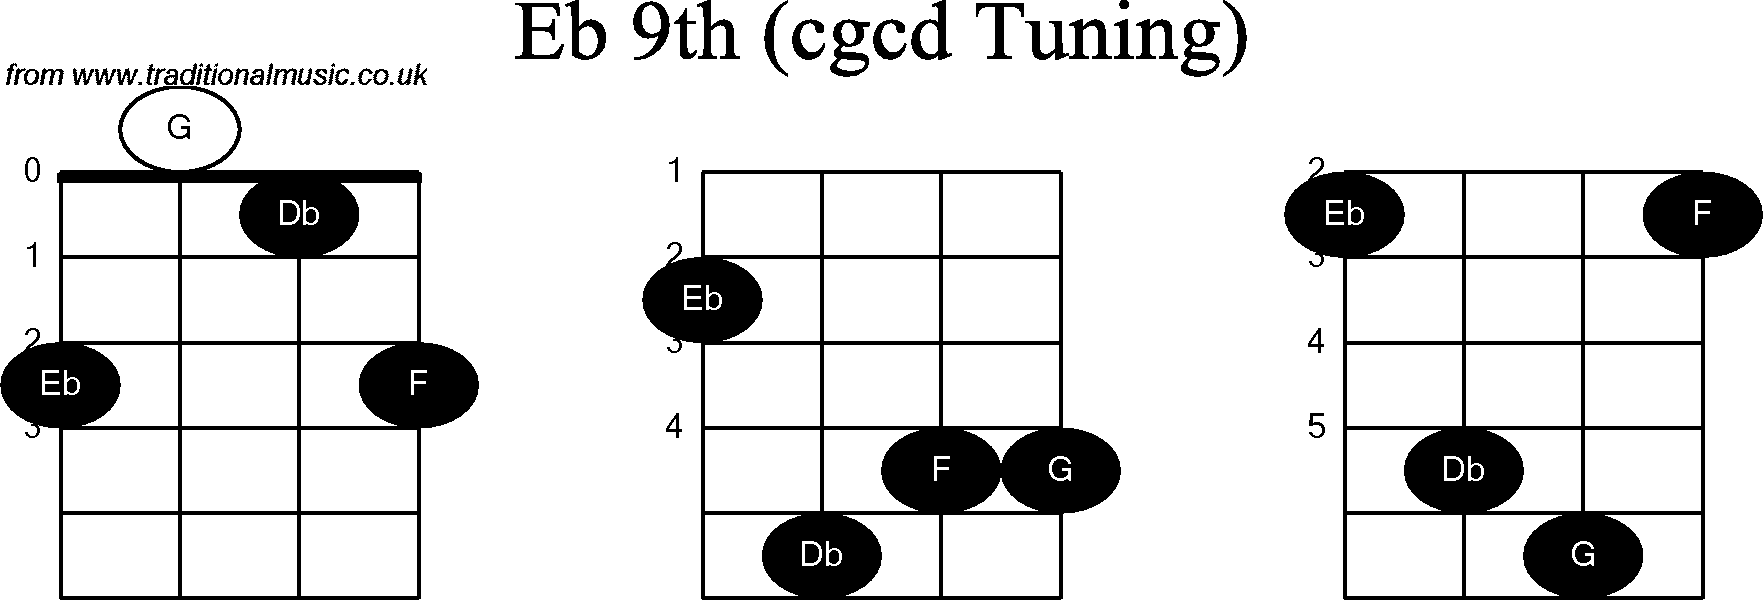 Chord diagrams for Banjo(Double C) Eb9th